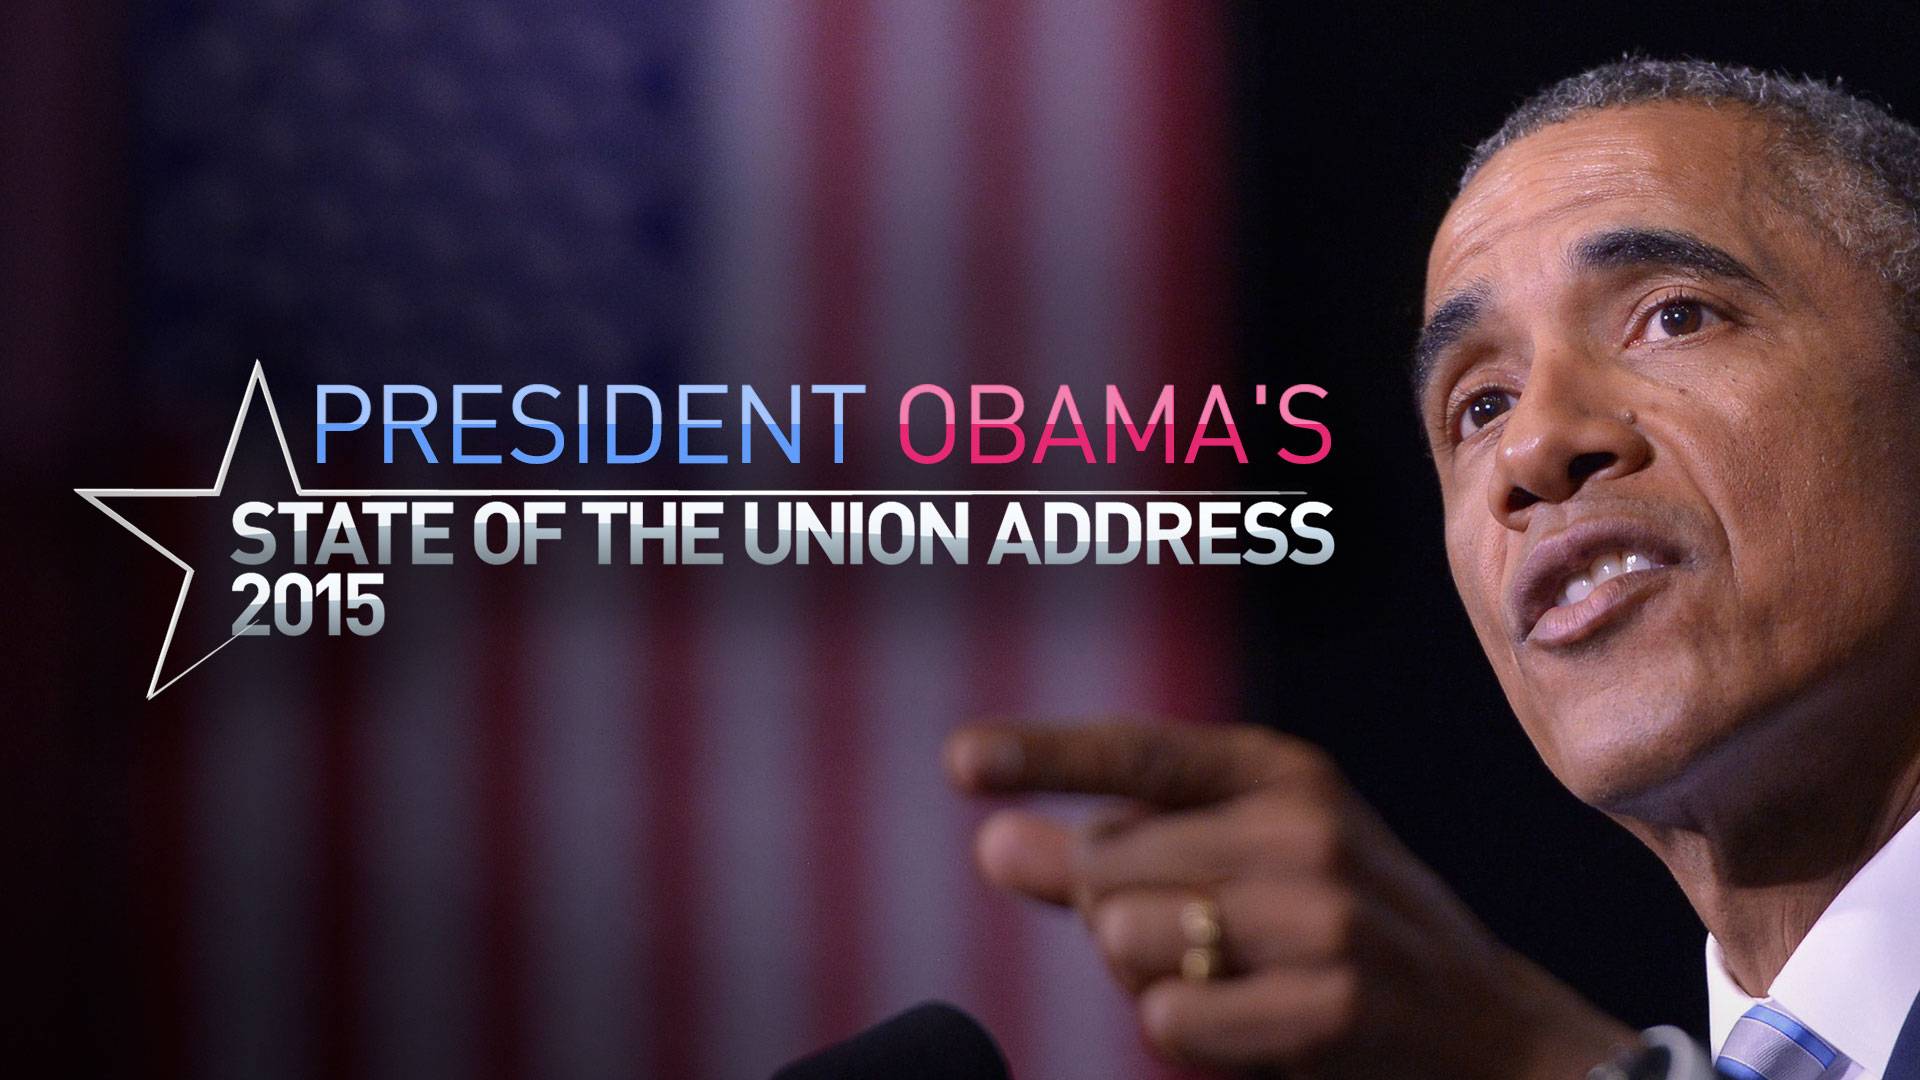 President Obama's 2015 State of the Union Address, Marc Lamont Hill